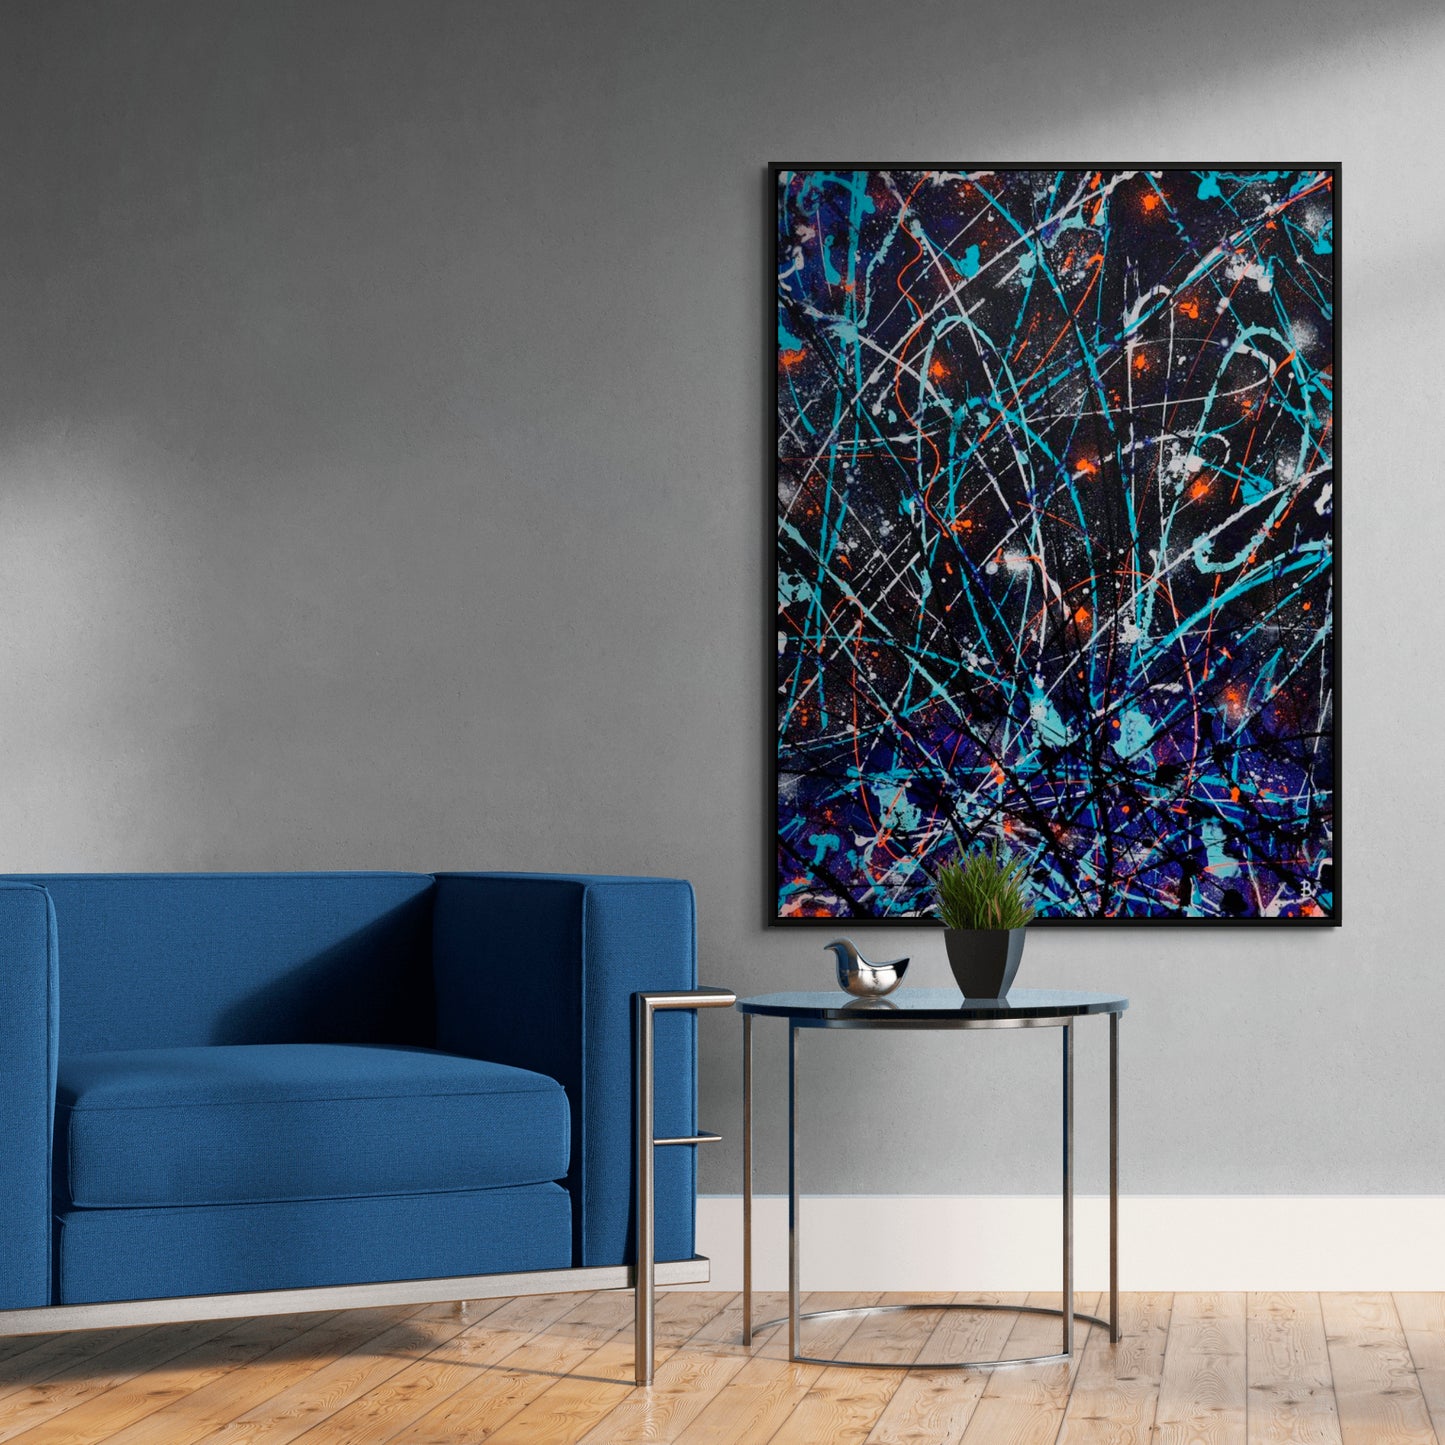 'Satellite' Original Abstract Painting seen Framed in Black Timber frame hanging near a Blue Chair. Hand painted on canvas by Bridget Bradley. Learn more.